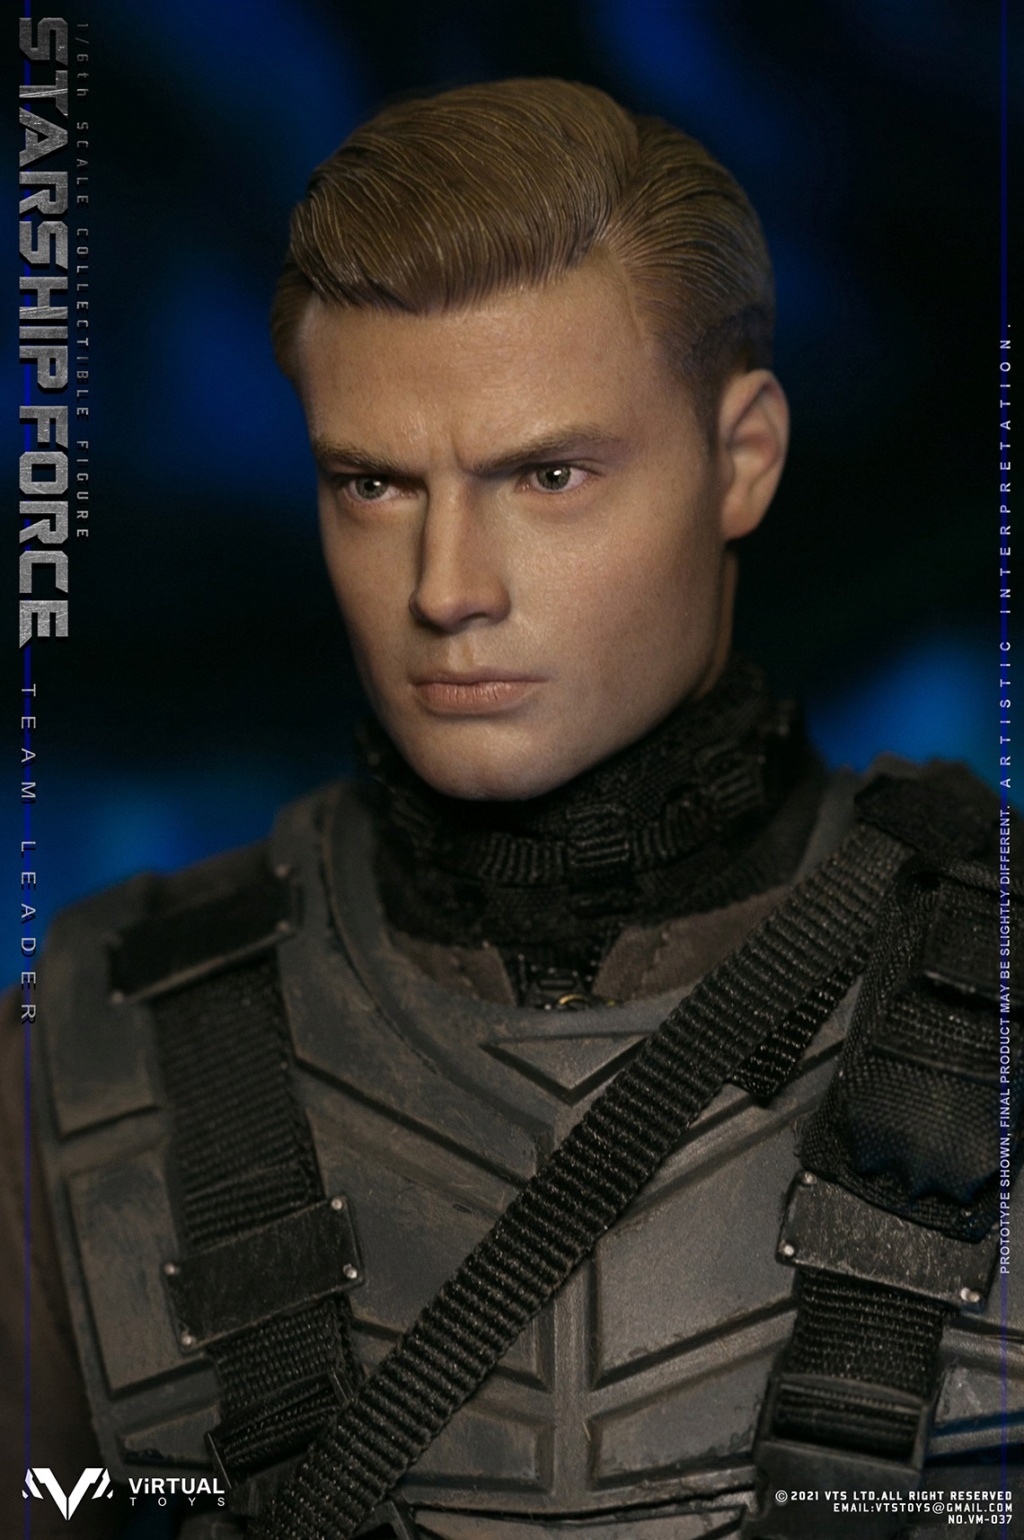 sci-fi - NEW PRODUCT: VTS VM037DX 1/6 Scale Starship Force-Team Leader Regular & Deluxe Version 15250111